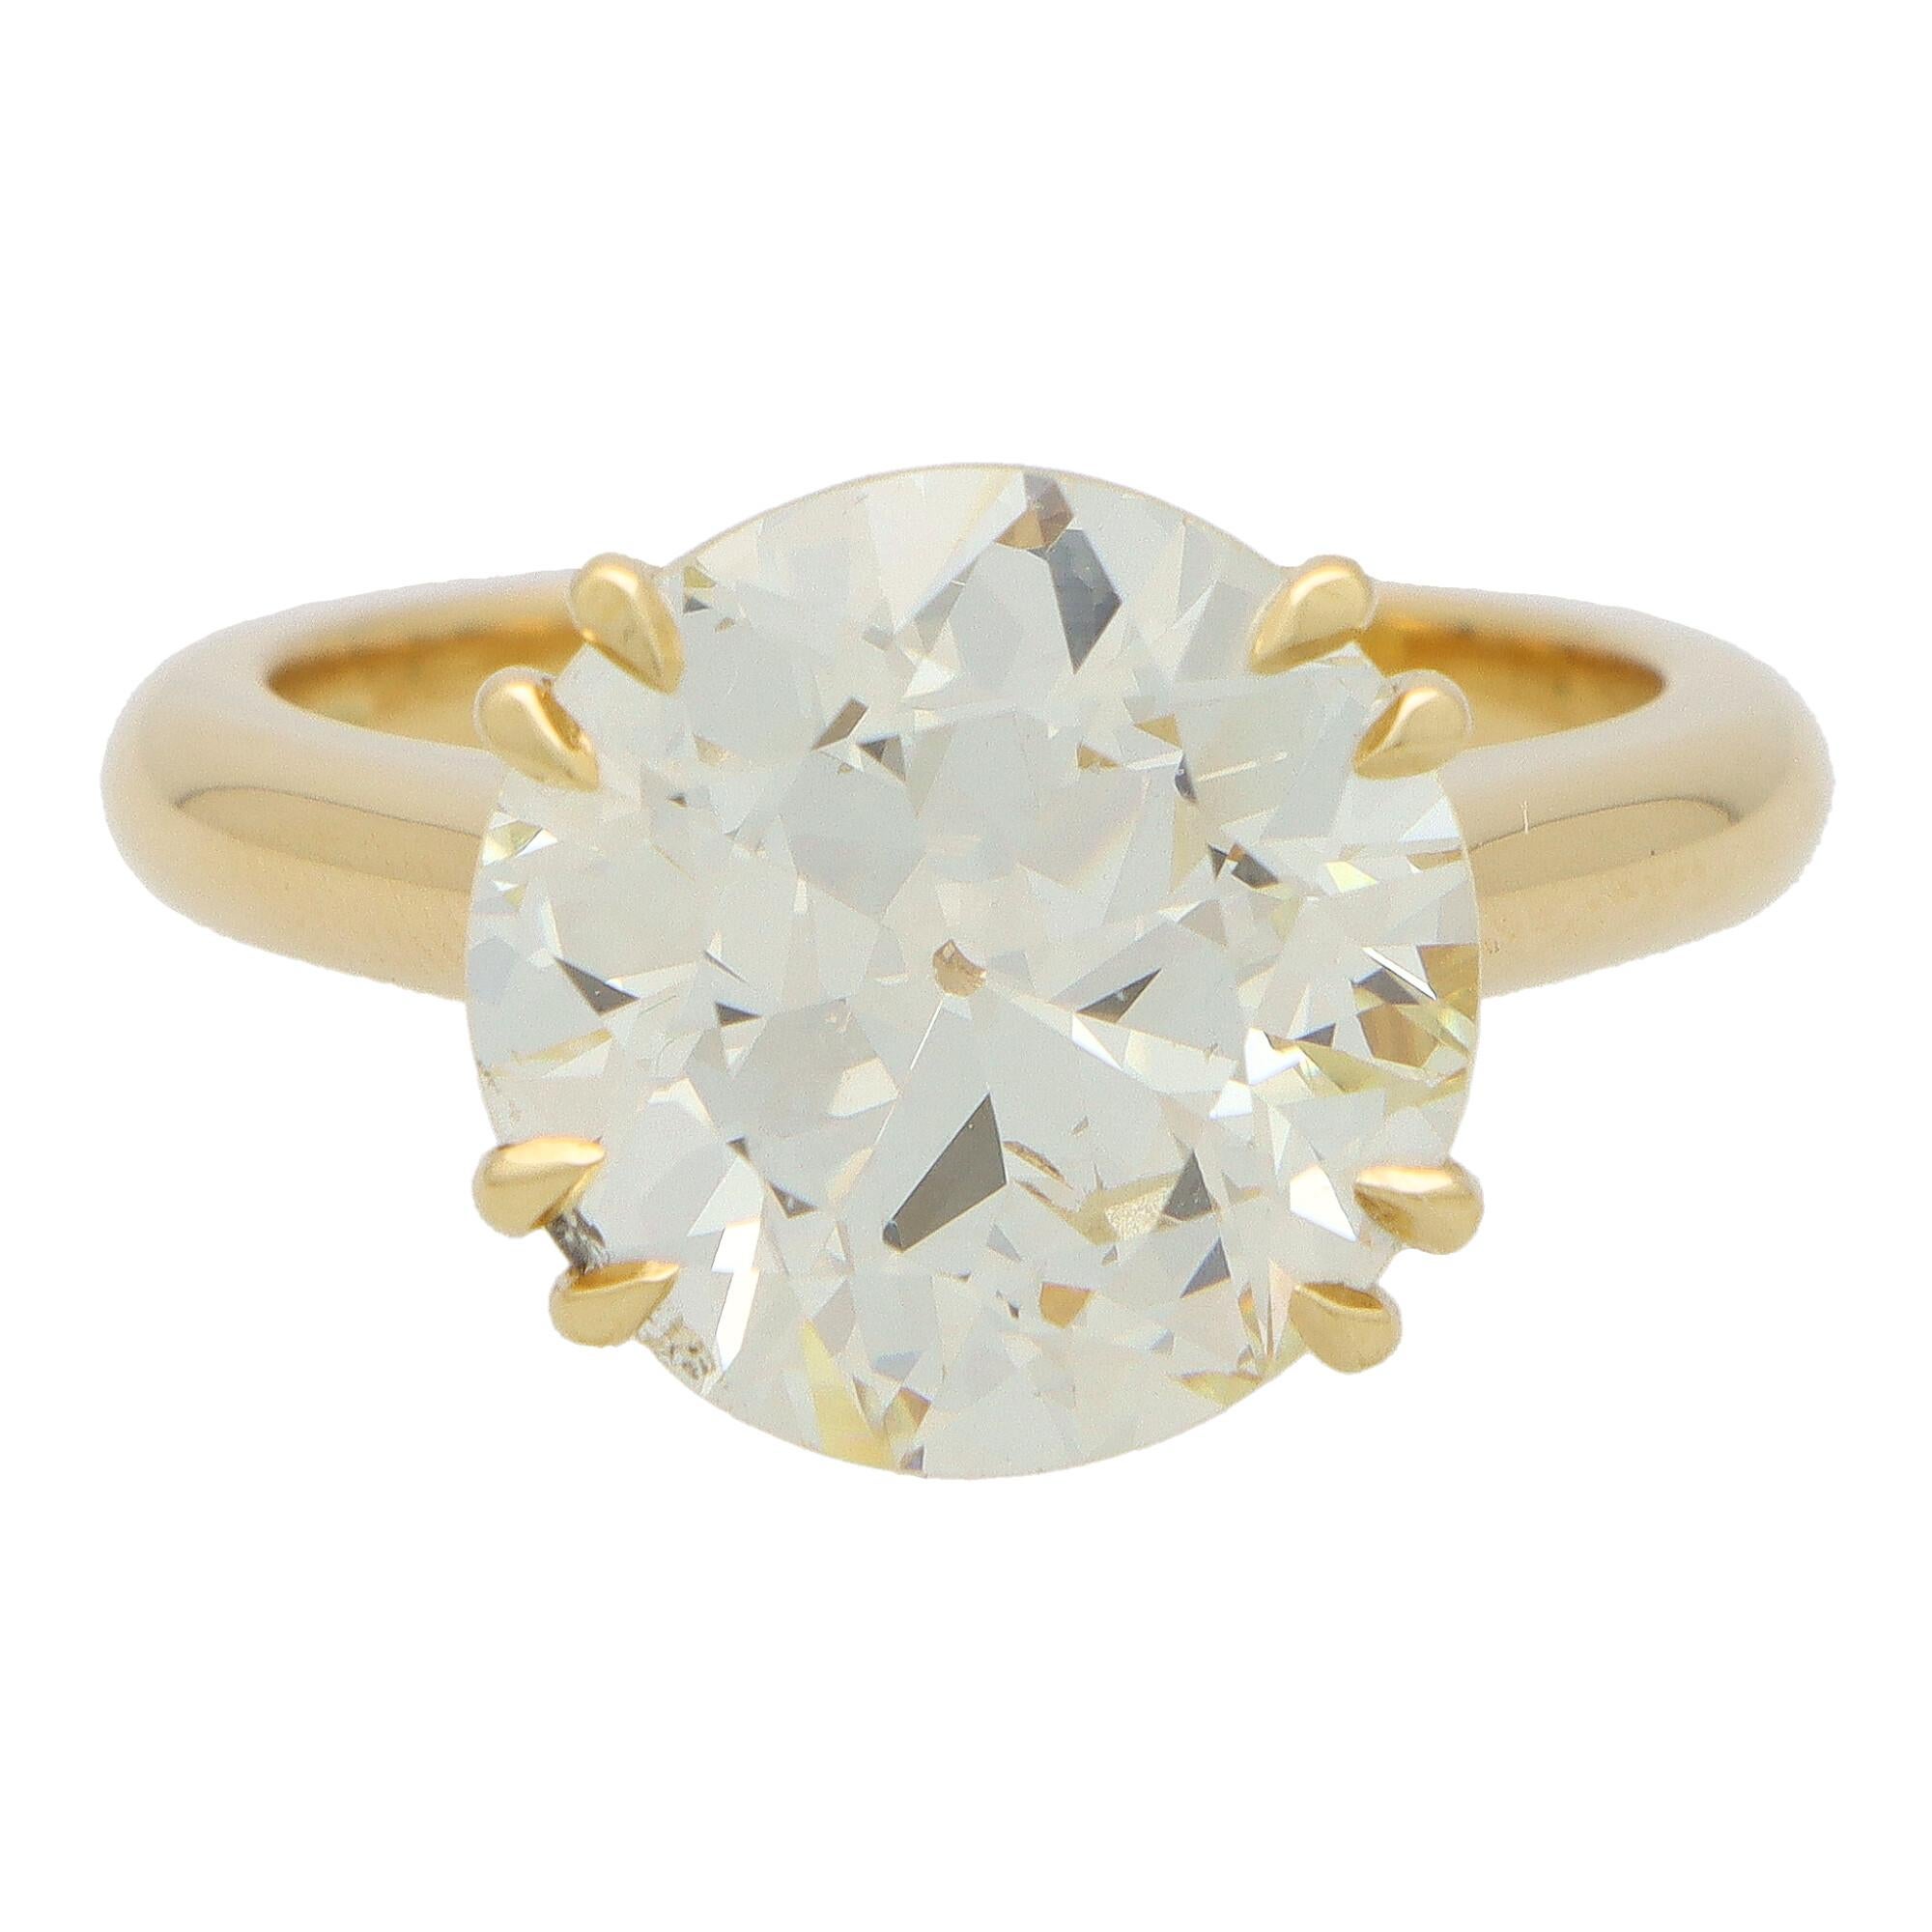 Certified 7.01 Carat Old Cut Diamond Solitaire Ring in Yellow Gold For Sale 1